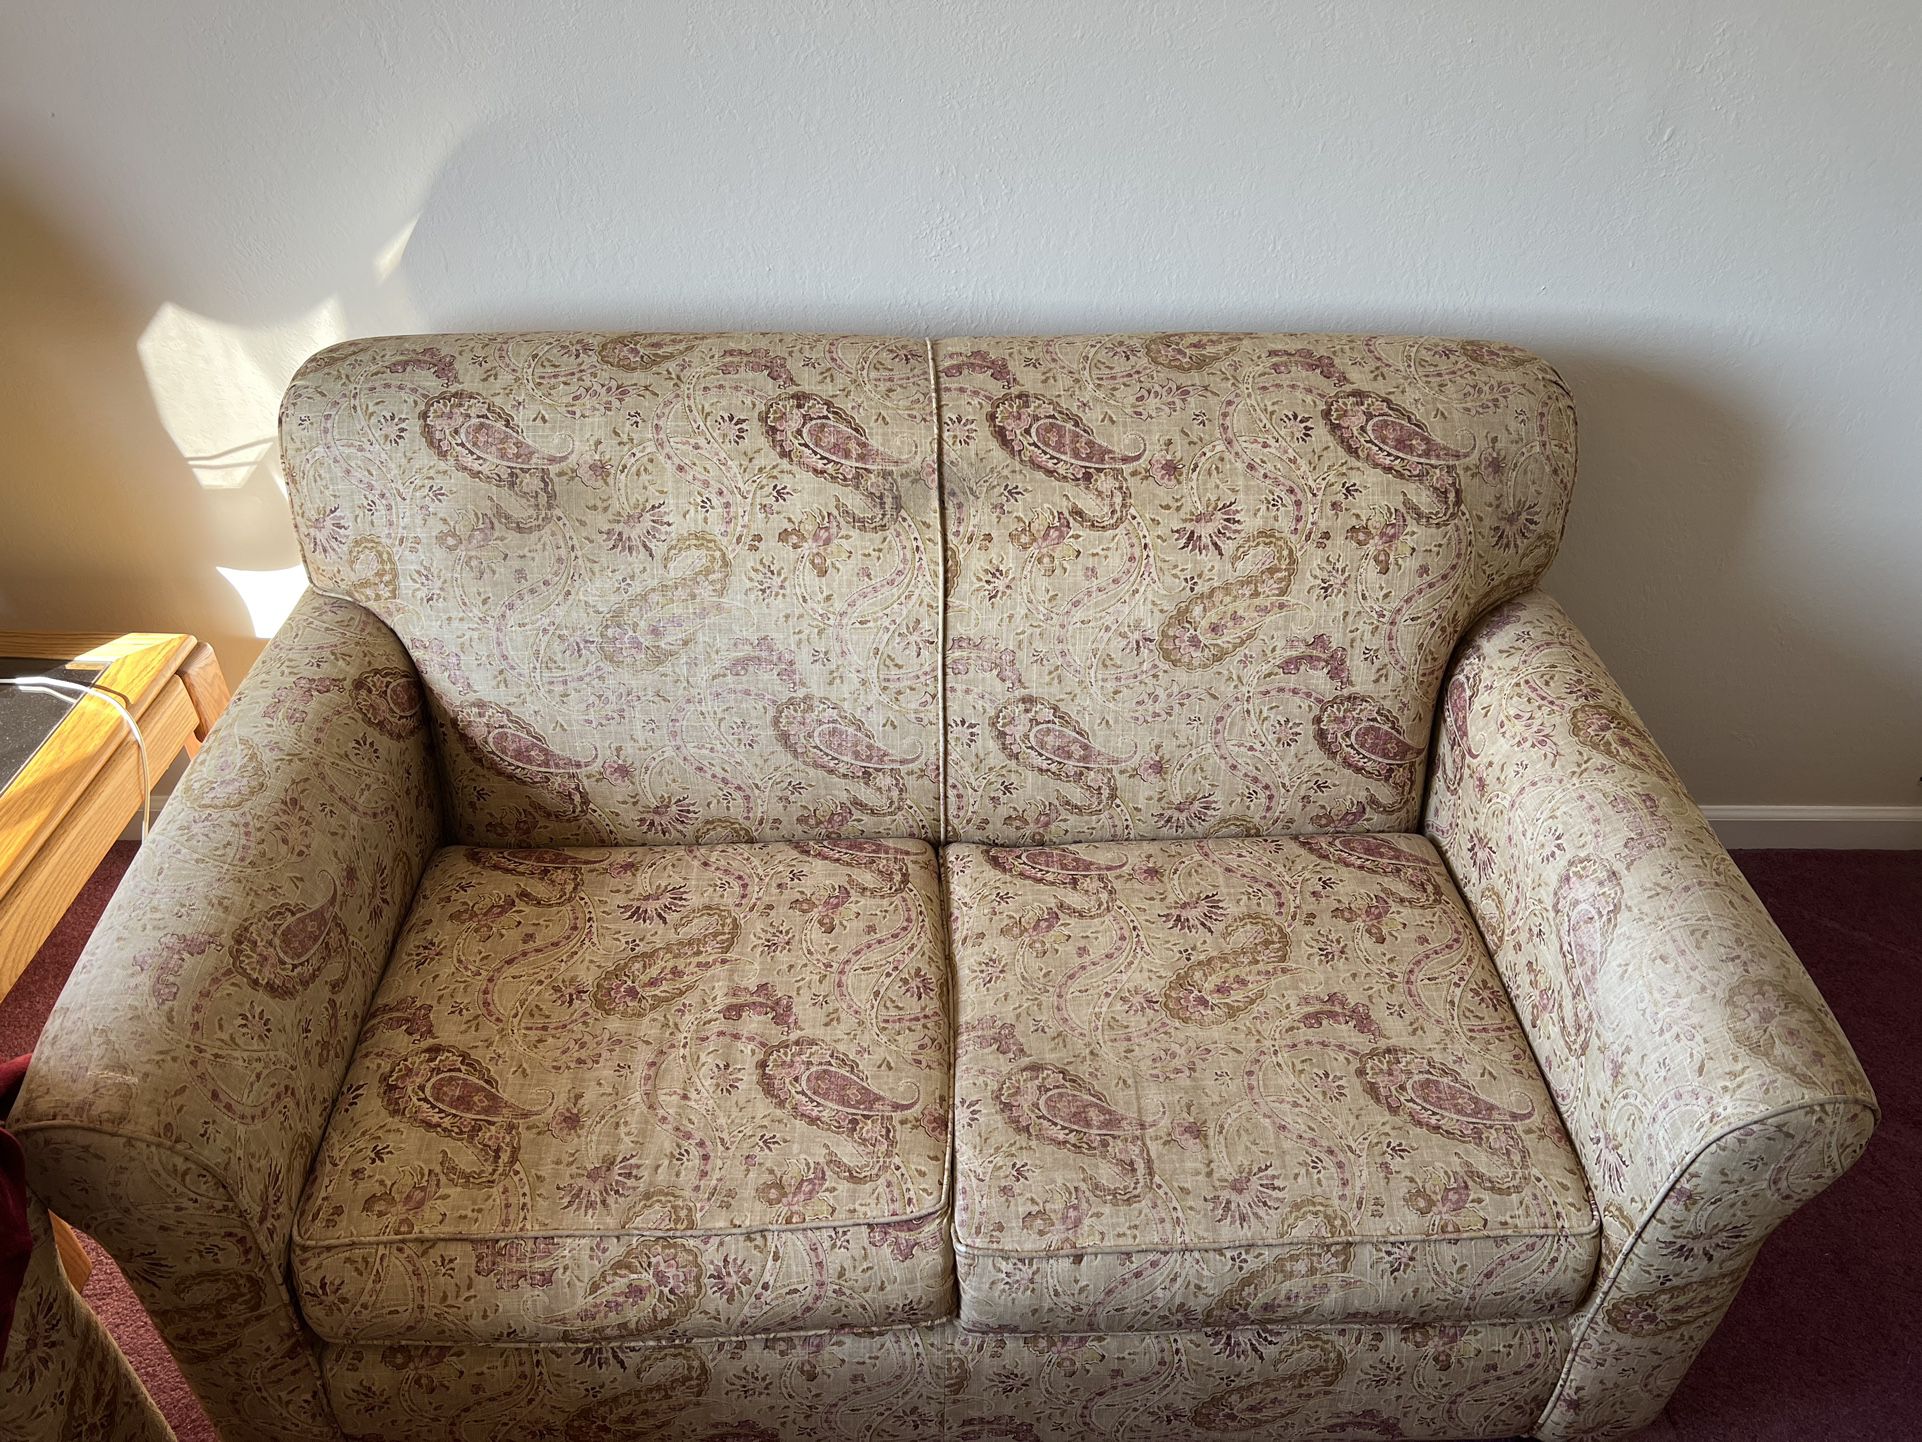  Loveseat paisley couch  - Free 